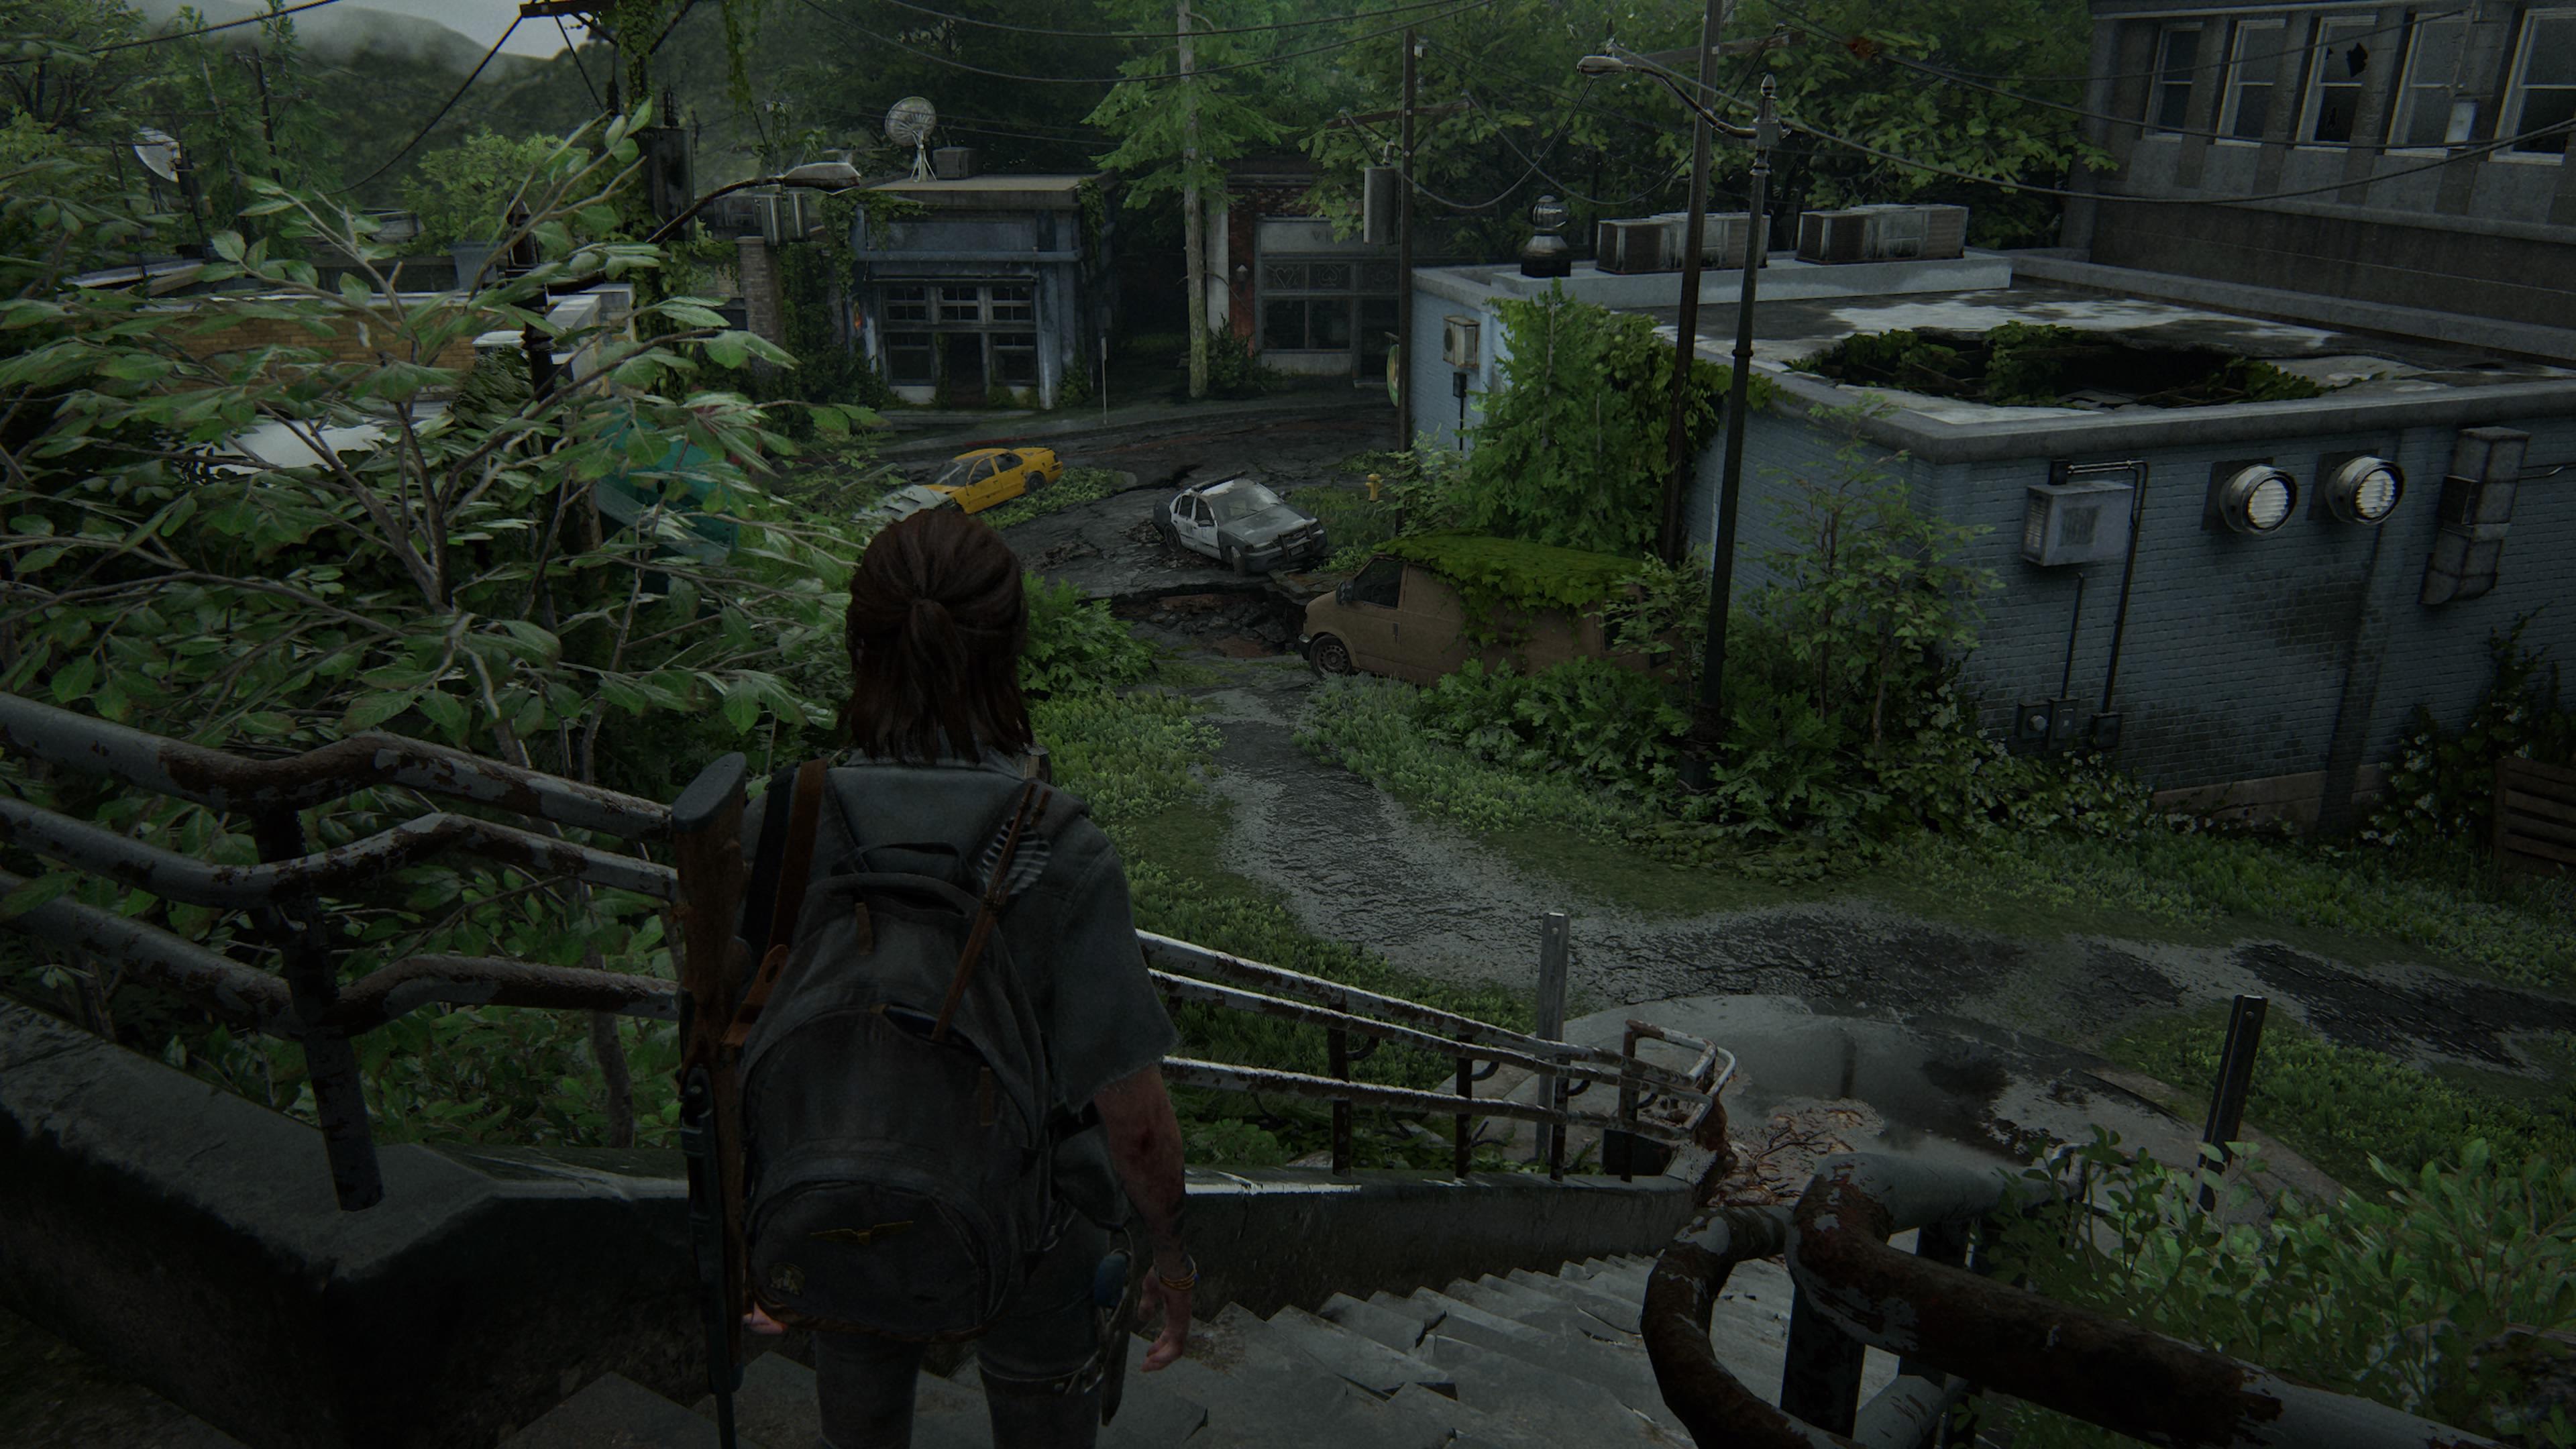 The Last Of Us Part Ii Ellie Ashley Johnson Playstation 4 Pro Sony Playstation Video Game Art Level  3840x2160